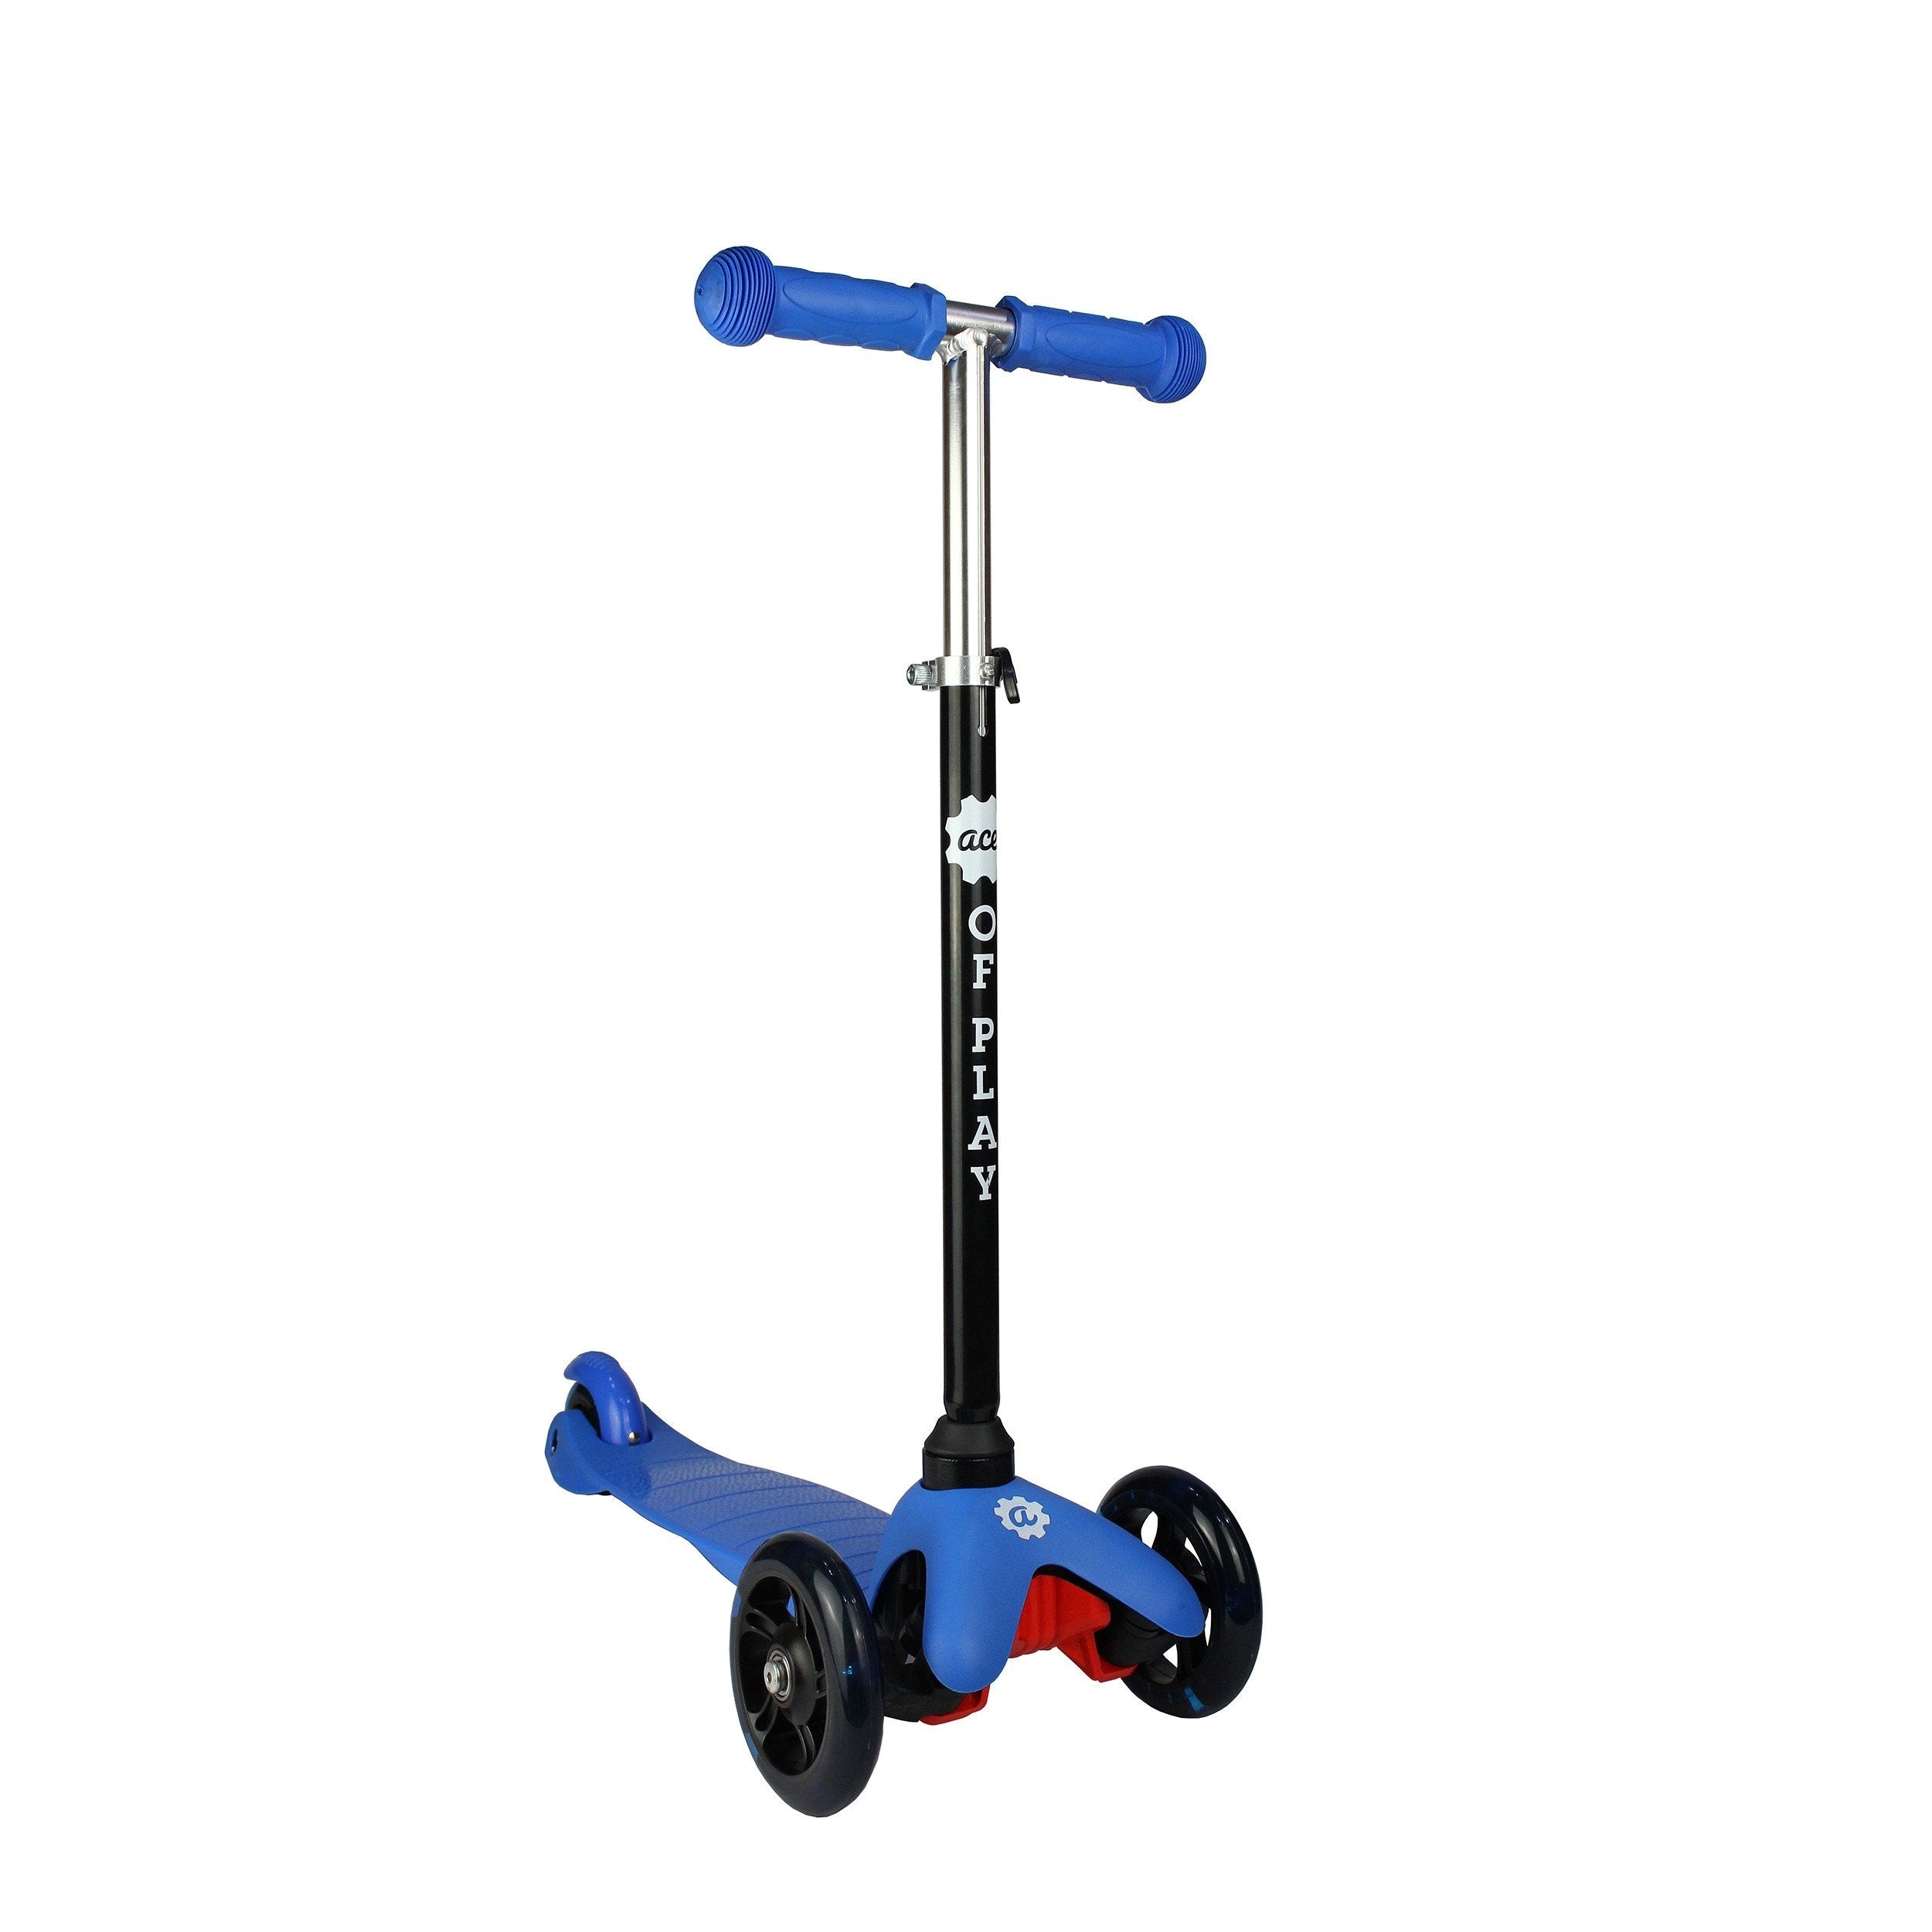 Ace of Play 3 Scooter with Flashing Wheels - – Dogg Scooters